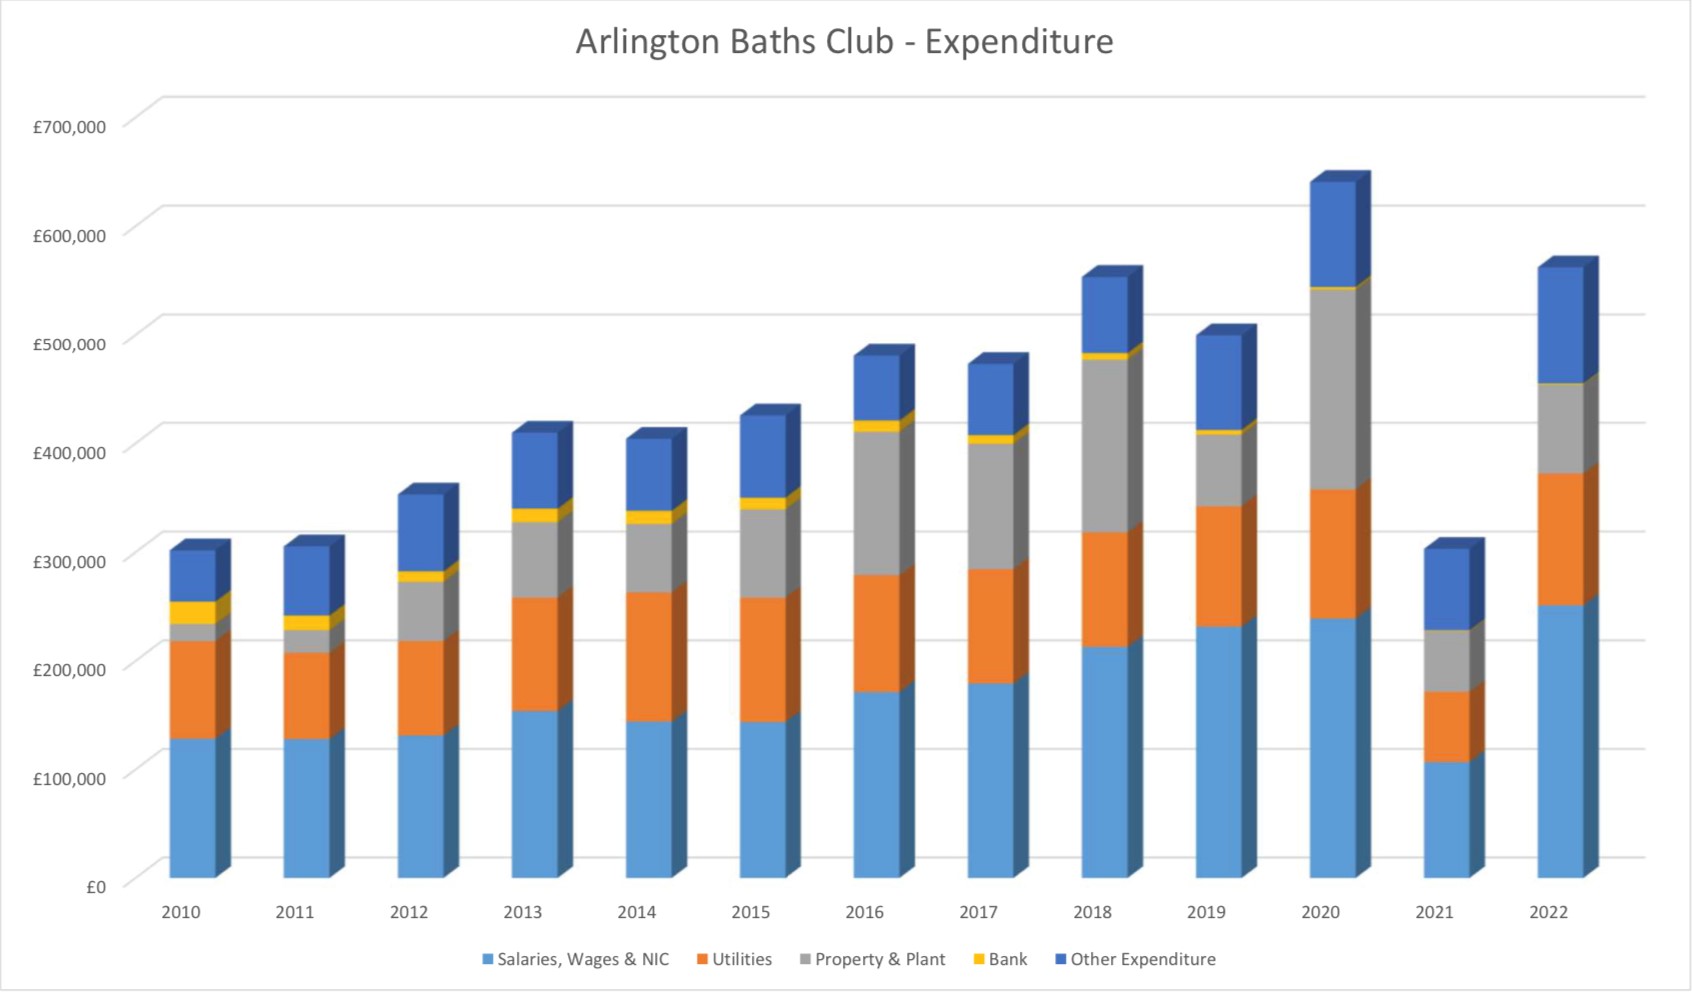 graph showing expenditure of the arlington baths club since 2000